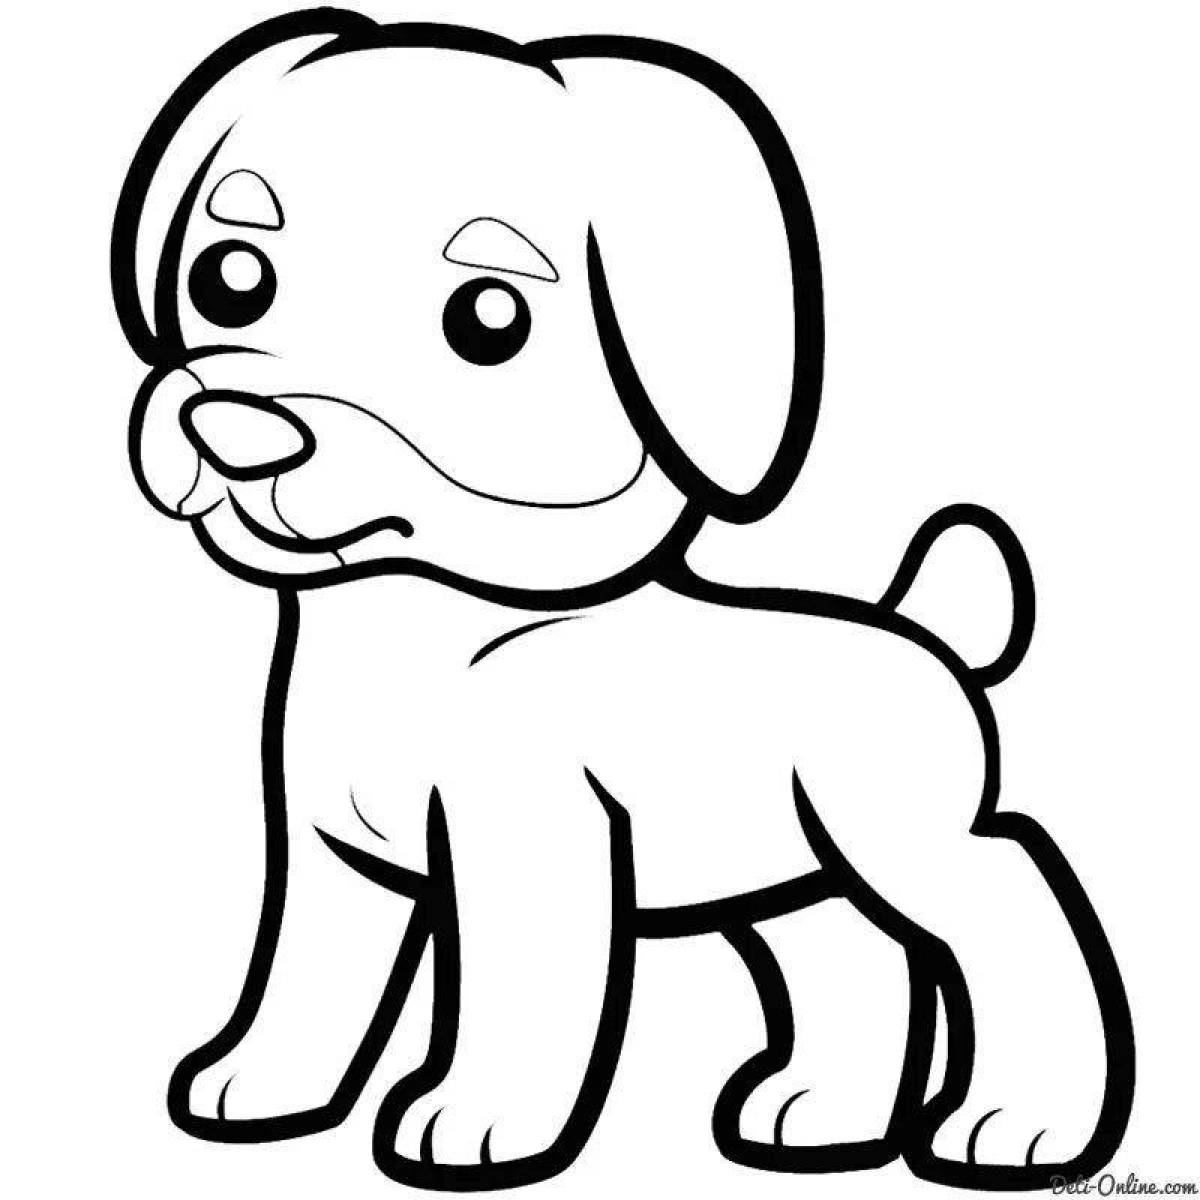 Friendly puppy coloring book for kids